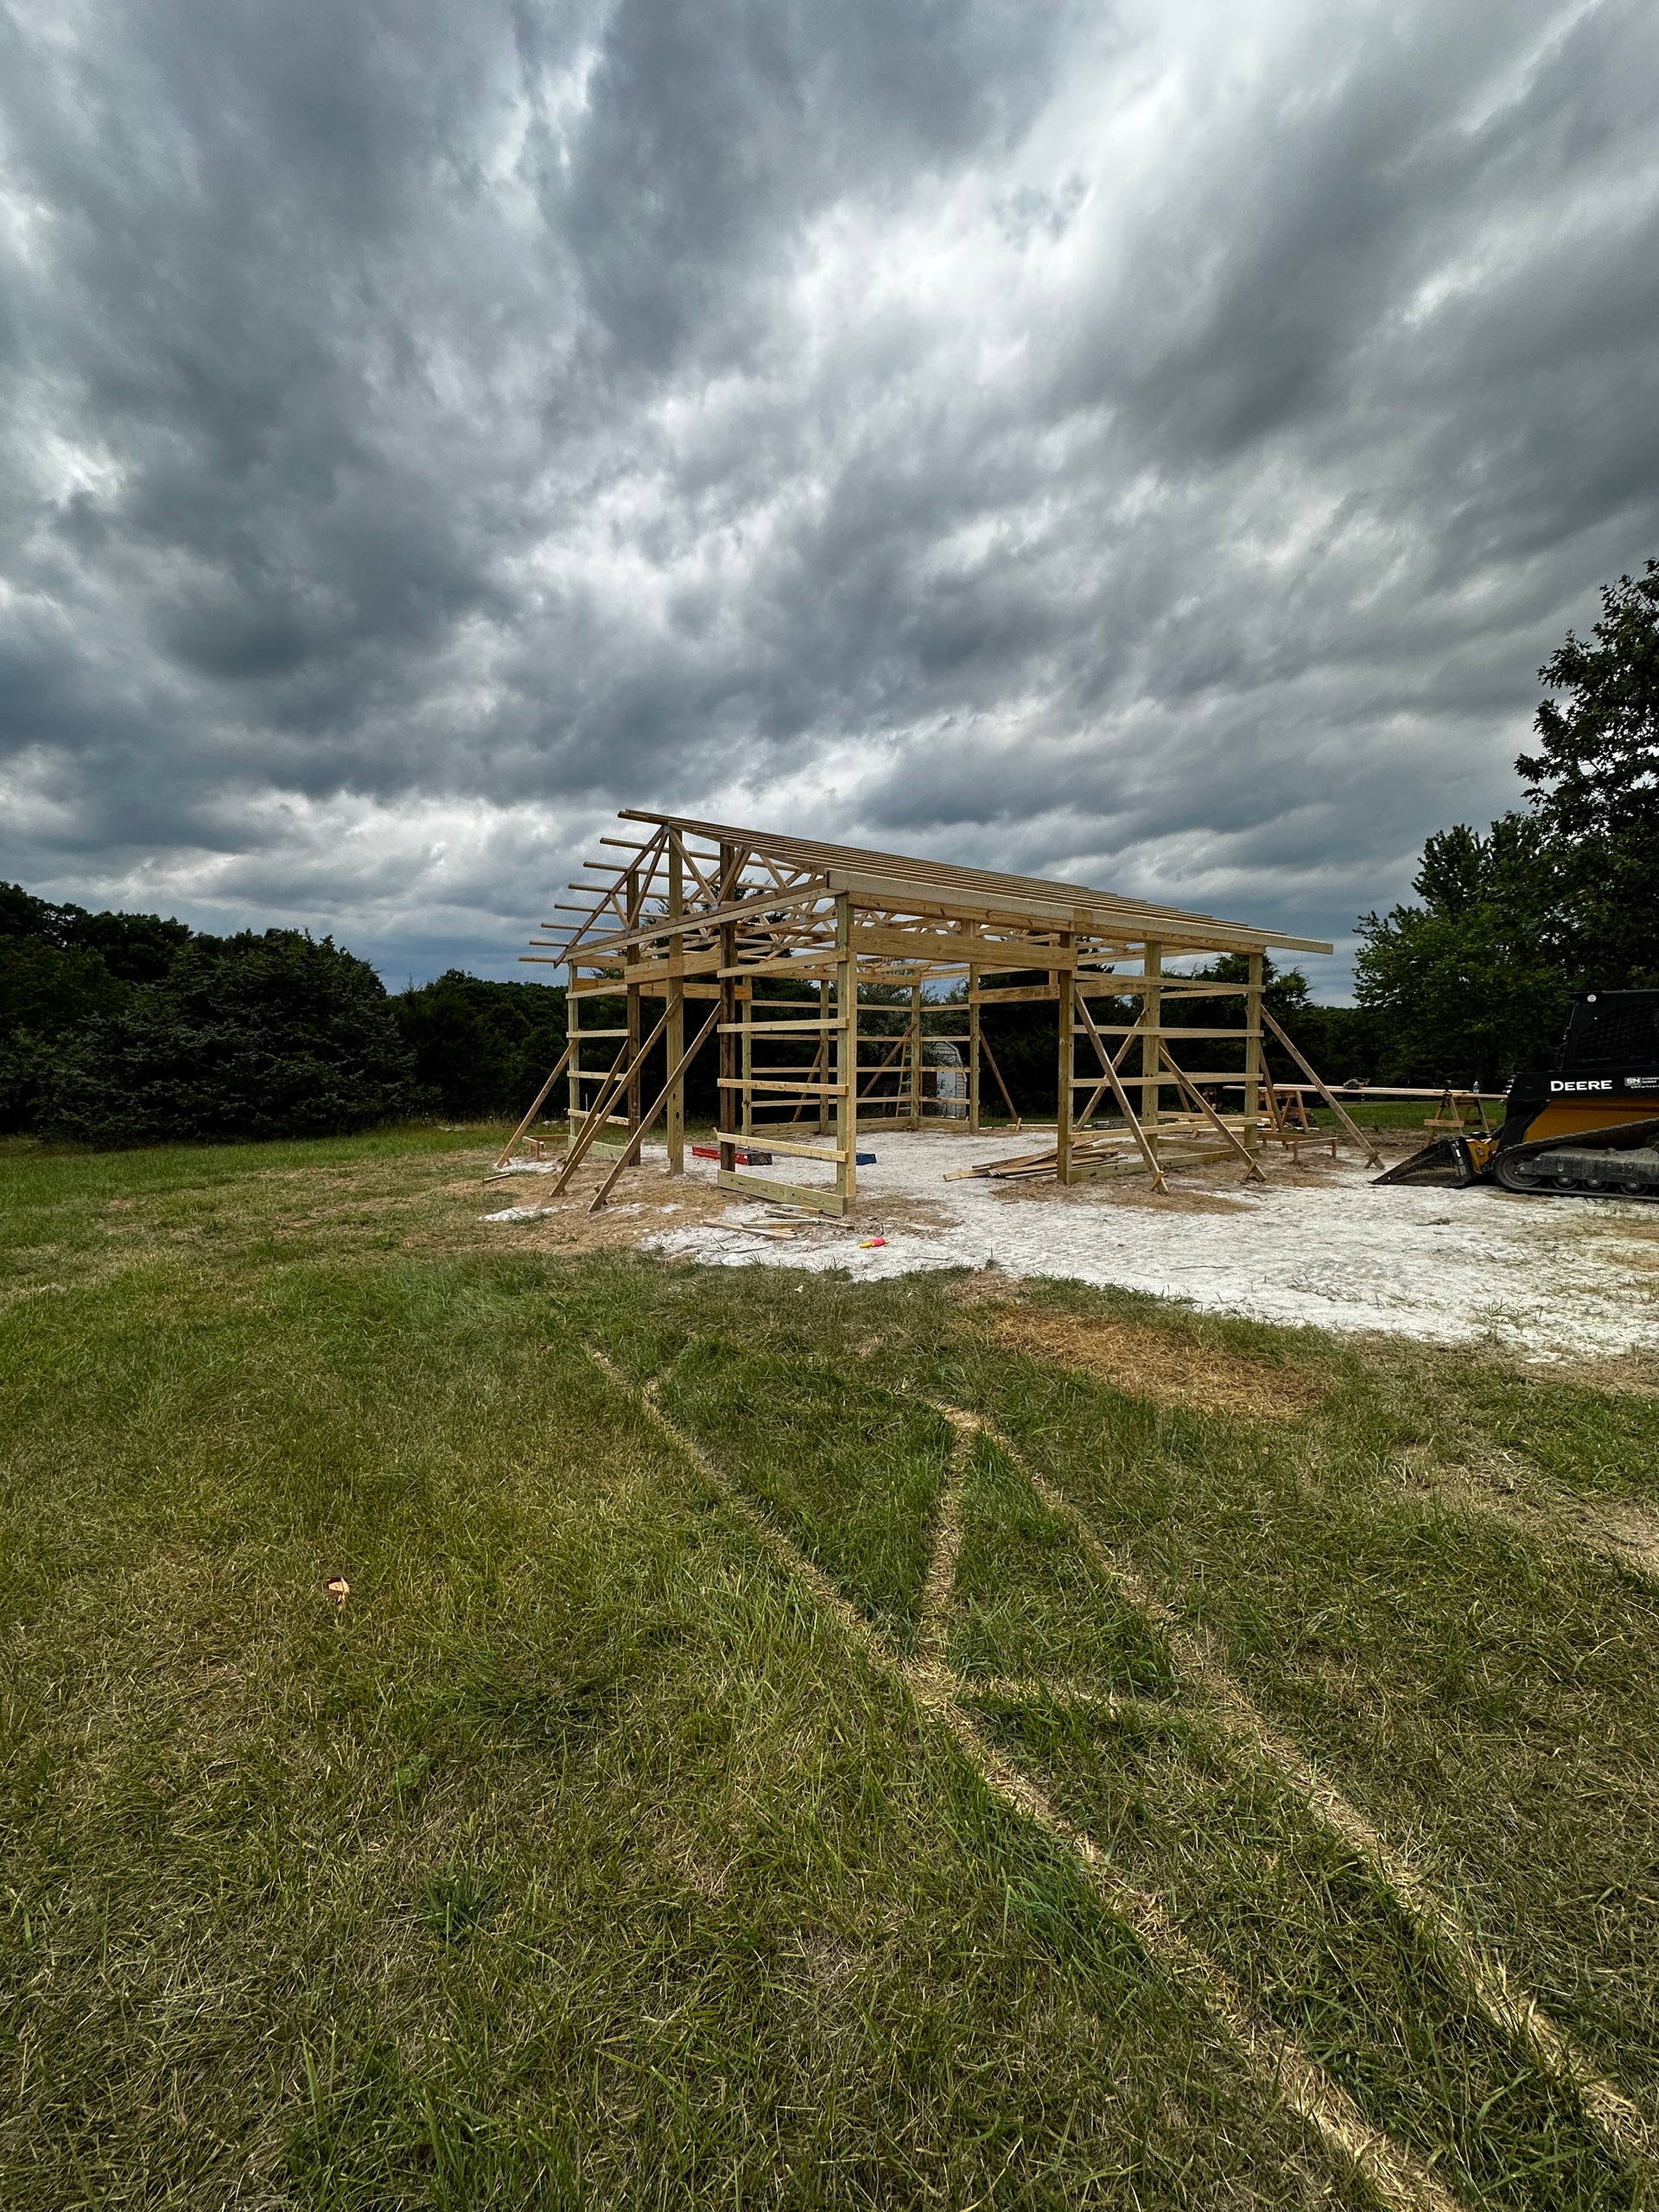 a wooden barn is being built in the middle of a grassy field .